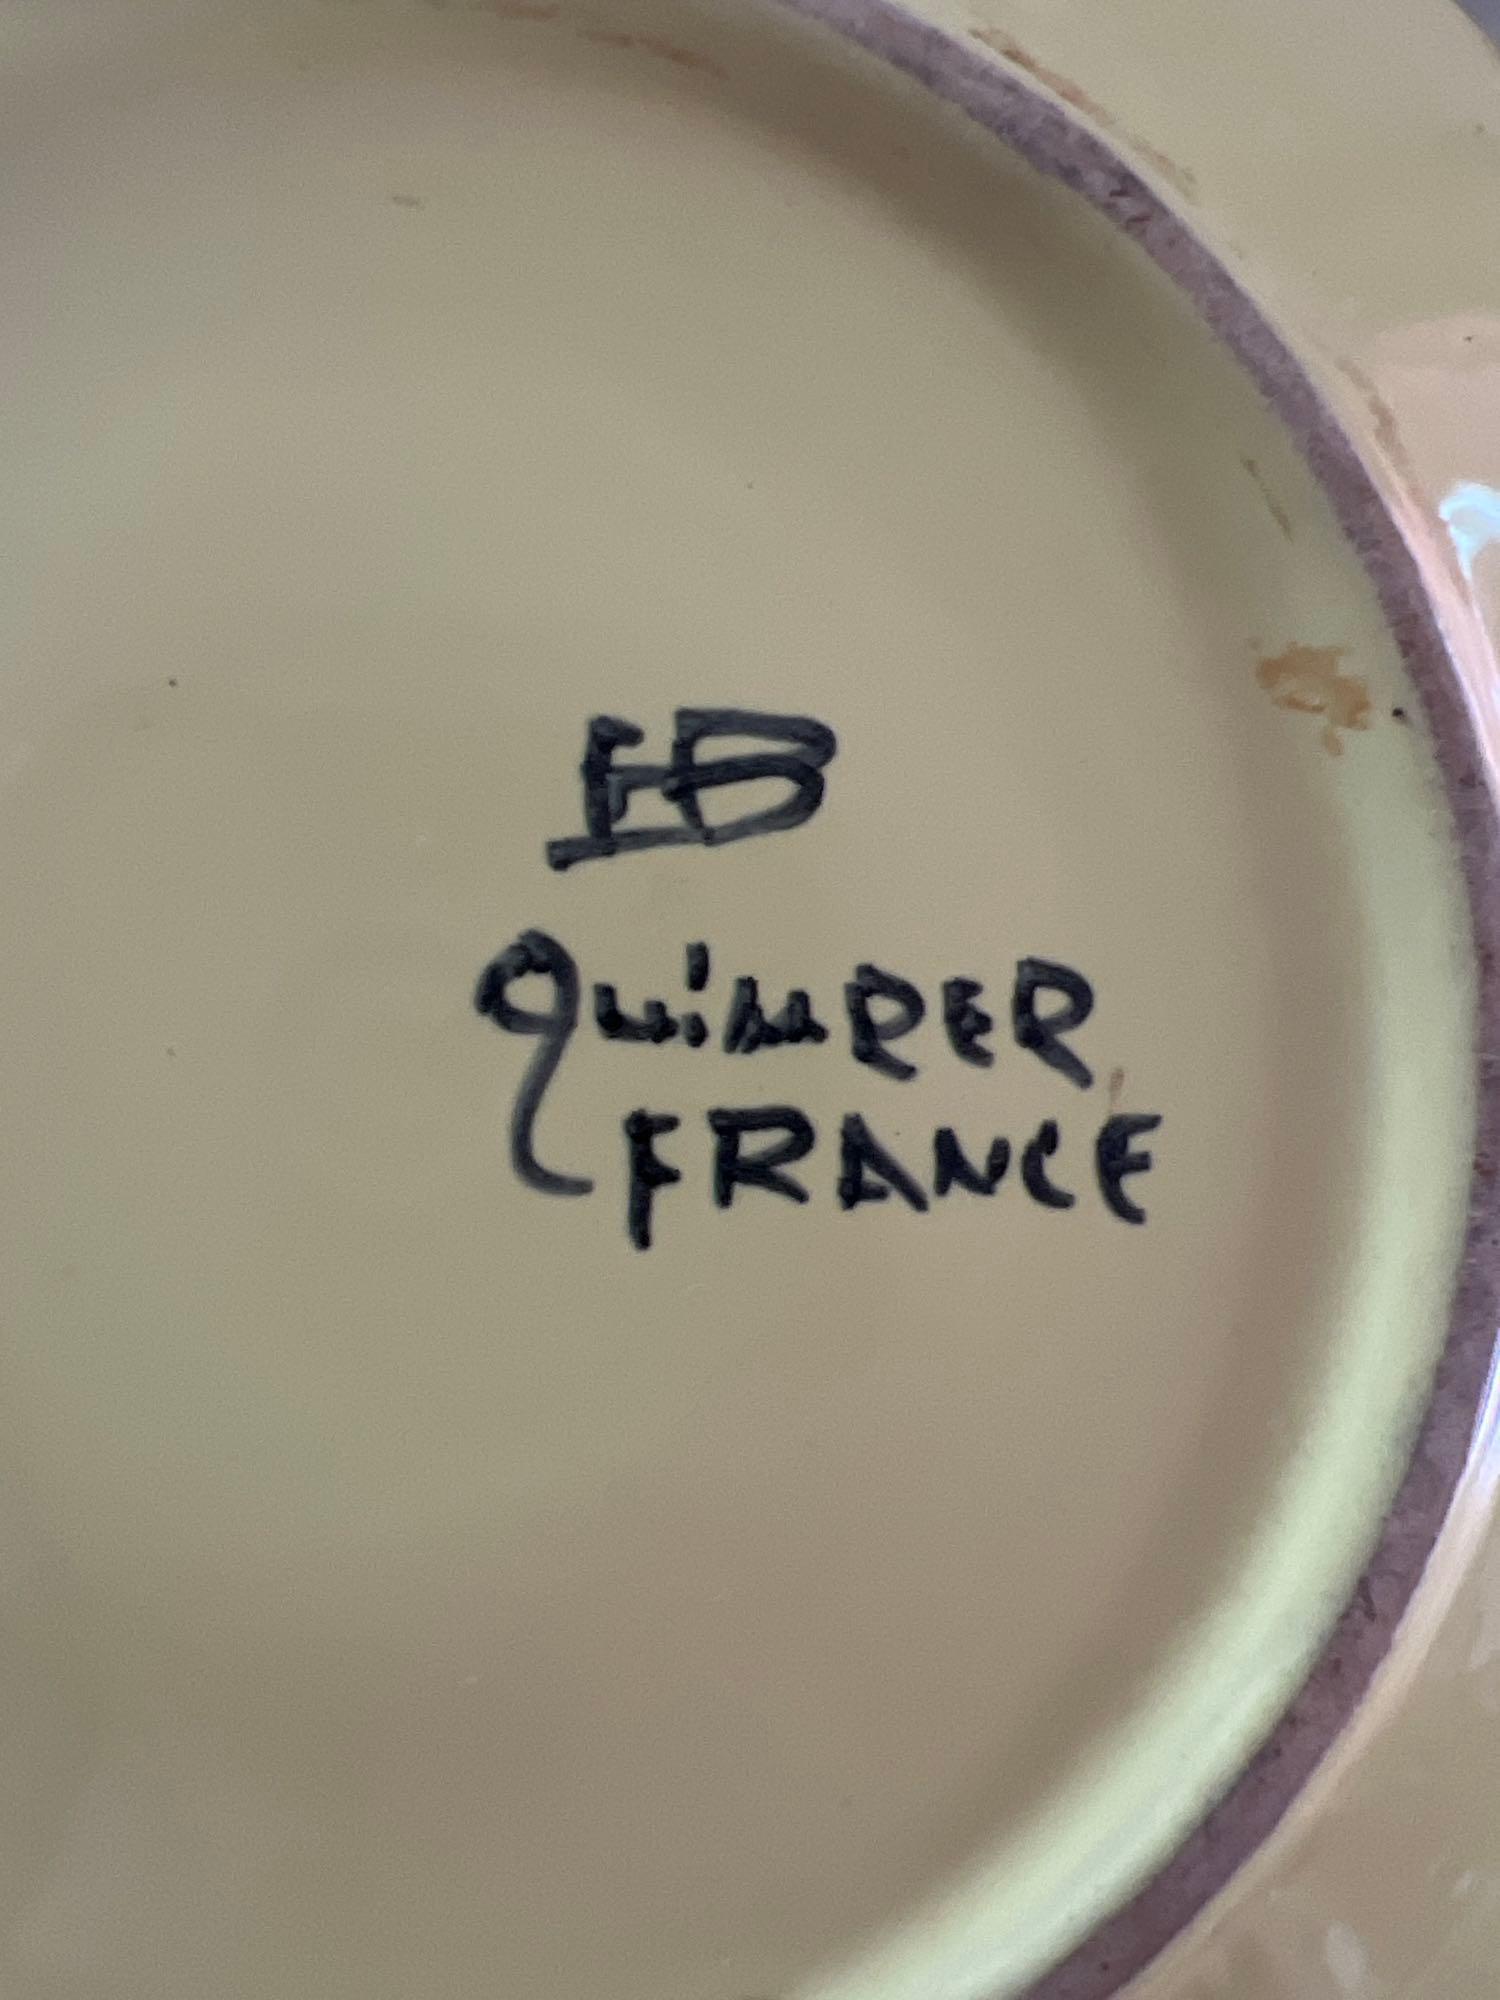 5- HB Quimper pottery China